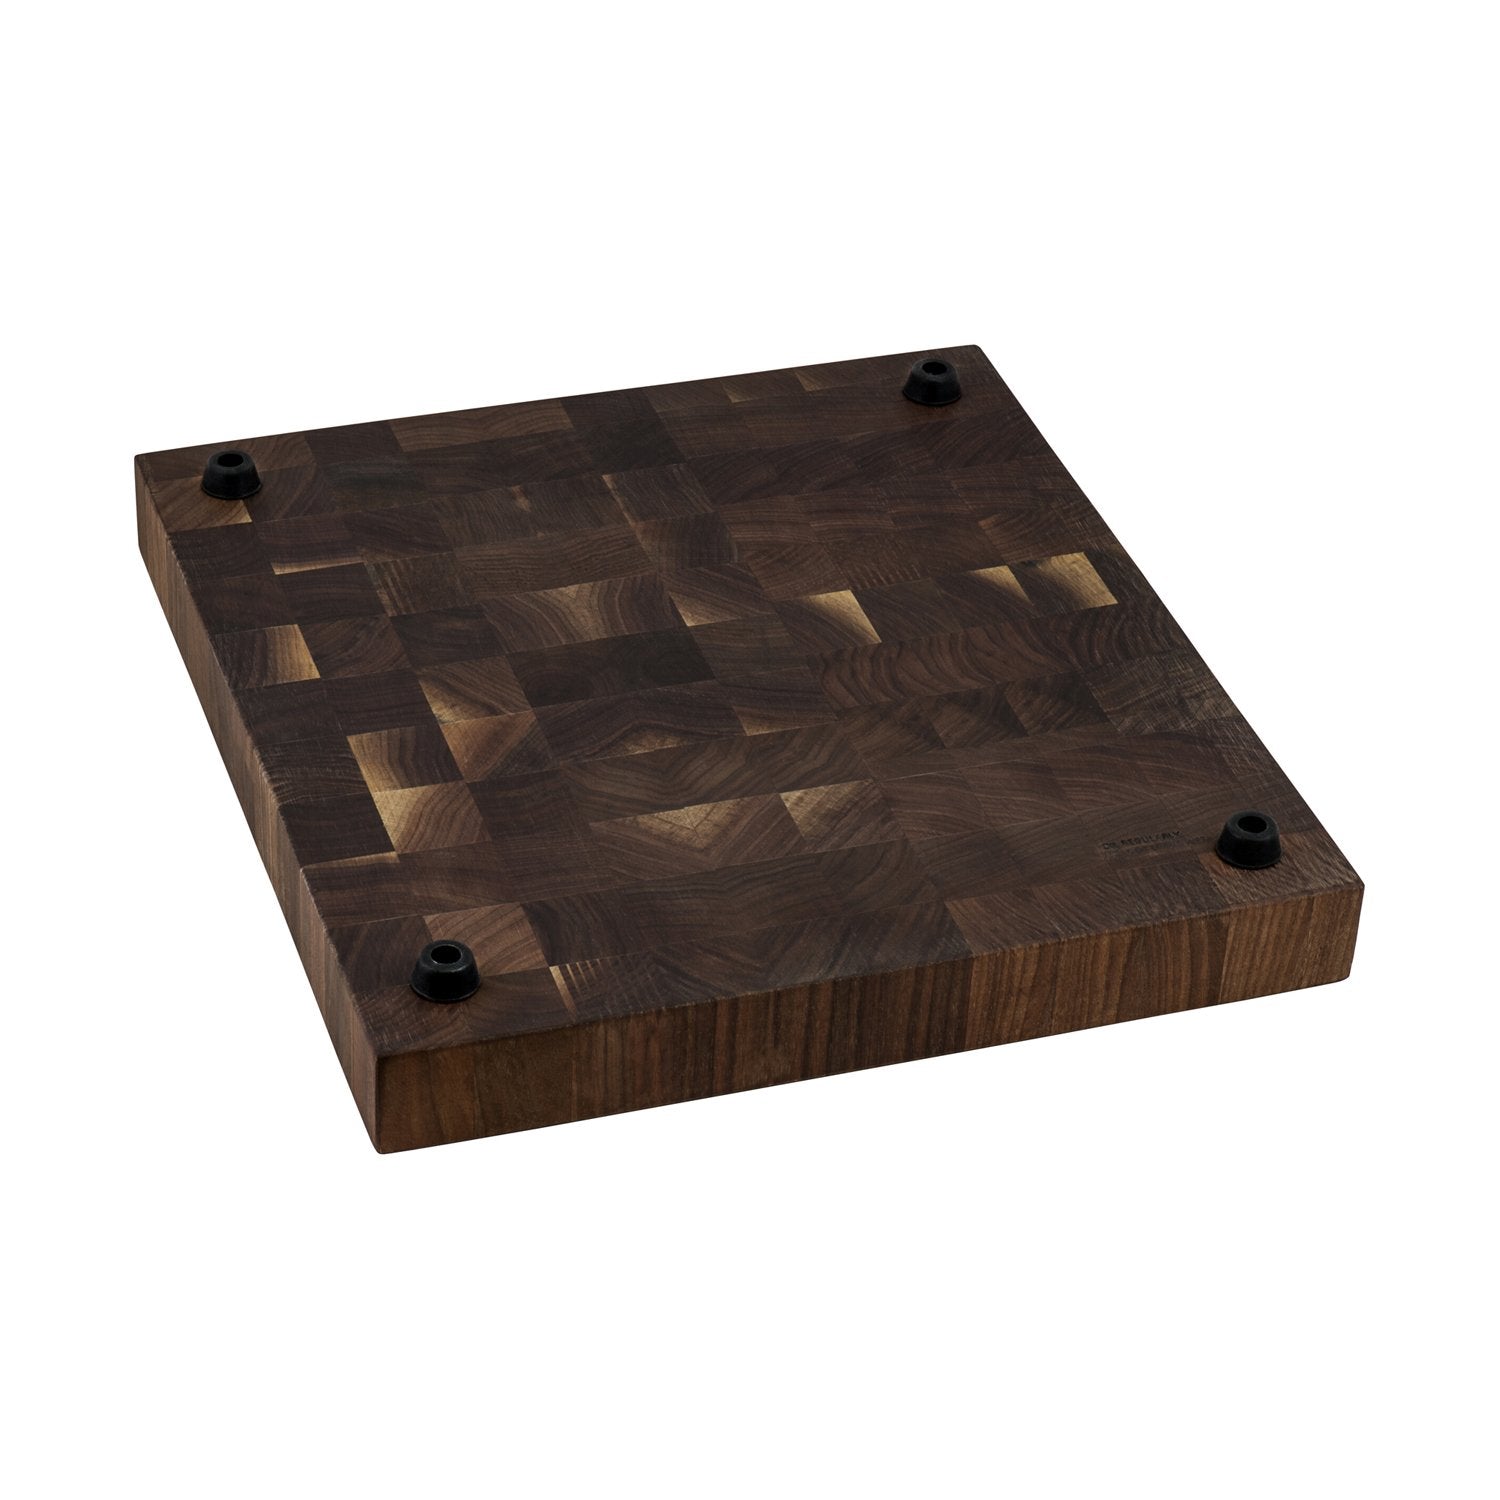 Ruvati 17 x 16 x 2 inch thick End-Grain American Walnut and Maple Chec -  HouseTie